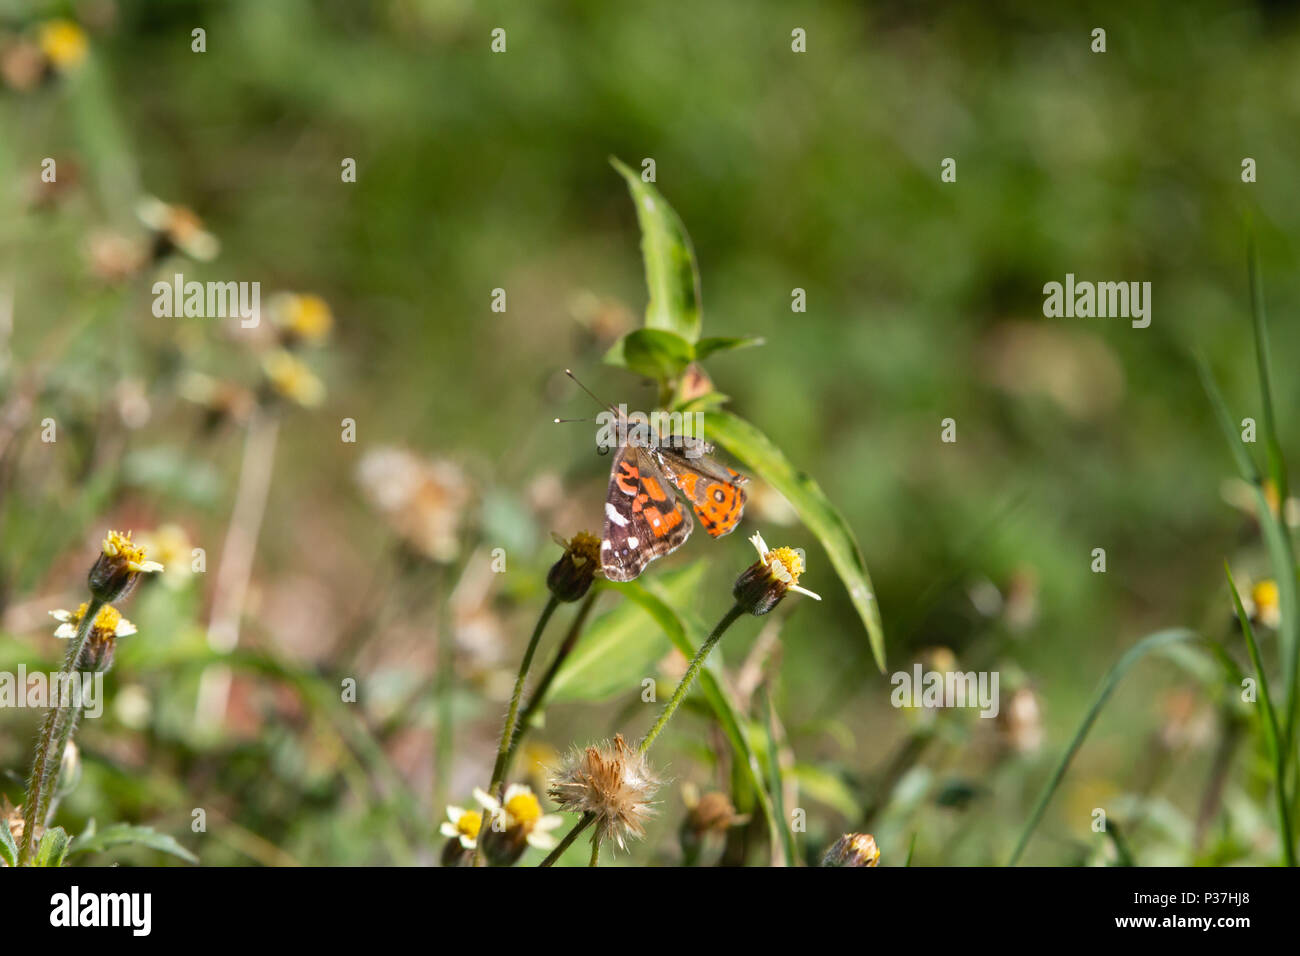 A Brazilian painted lady (Vanessa braziliensis) butterfly with broken wings flies over tridax daisy or coatbuttons (Tridax procumbens) blooming flower Stock Photo